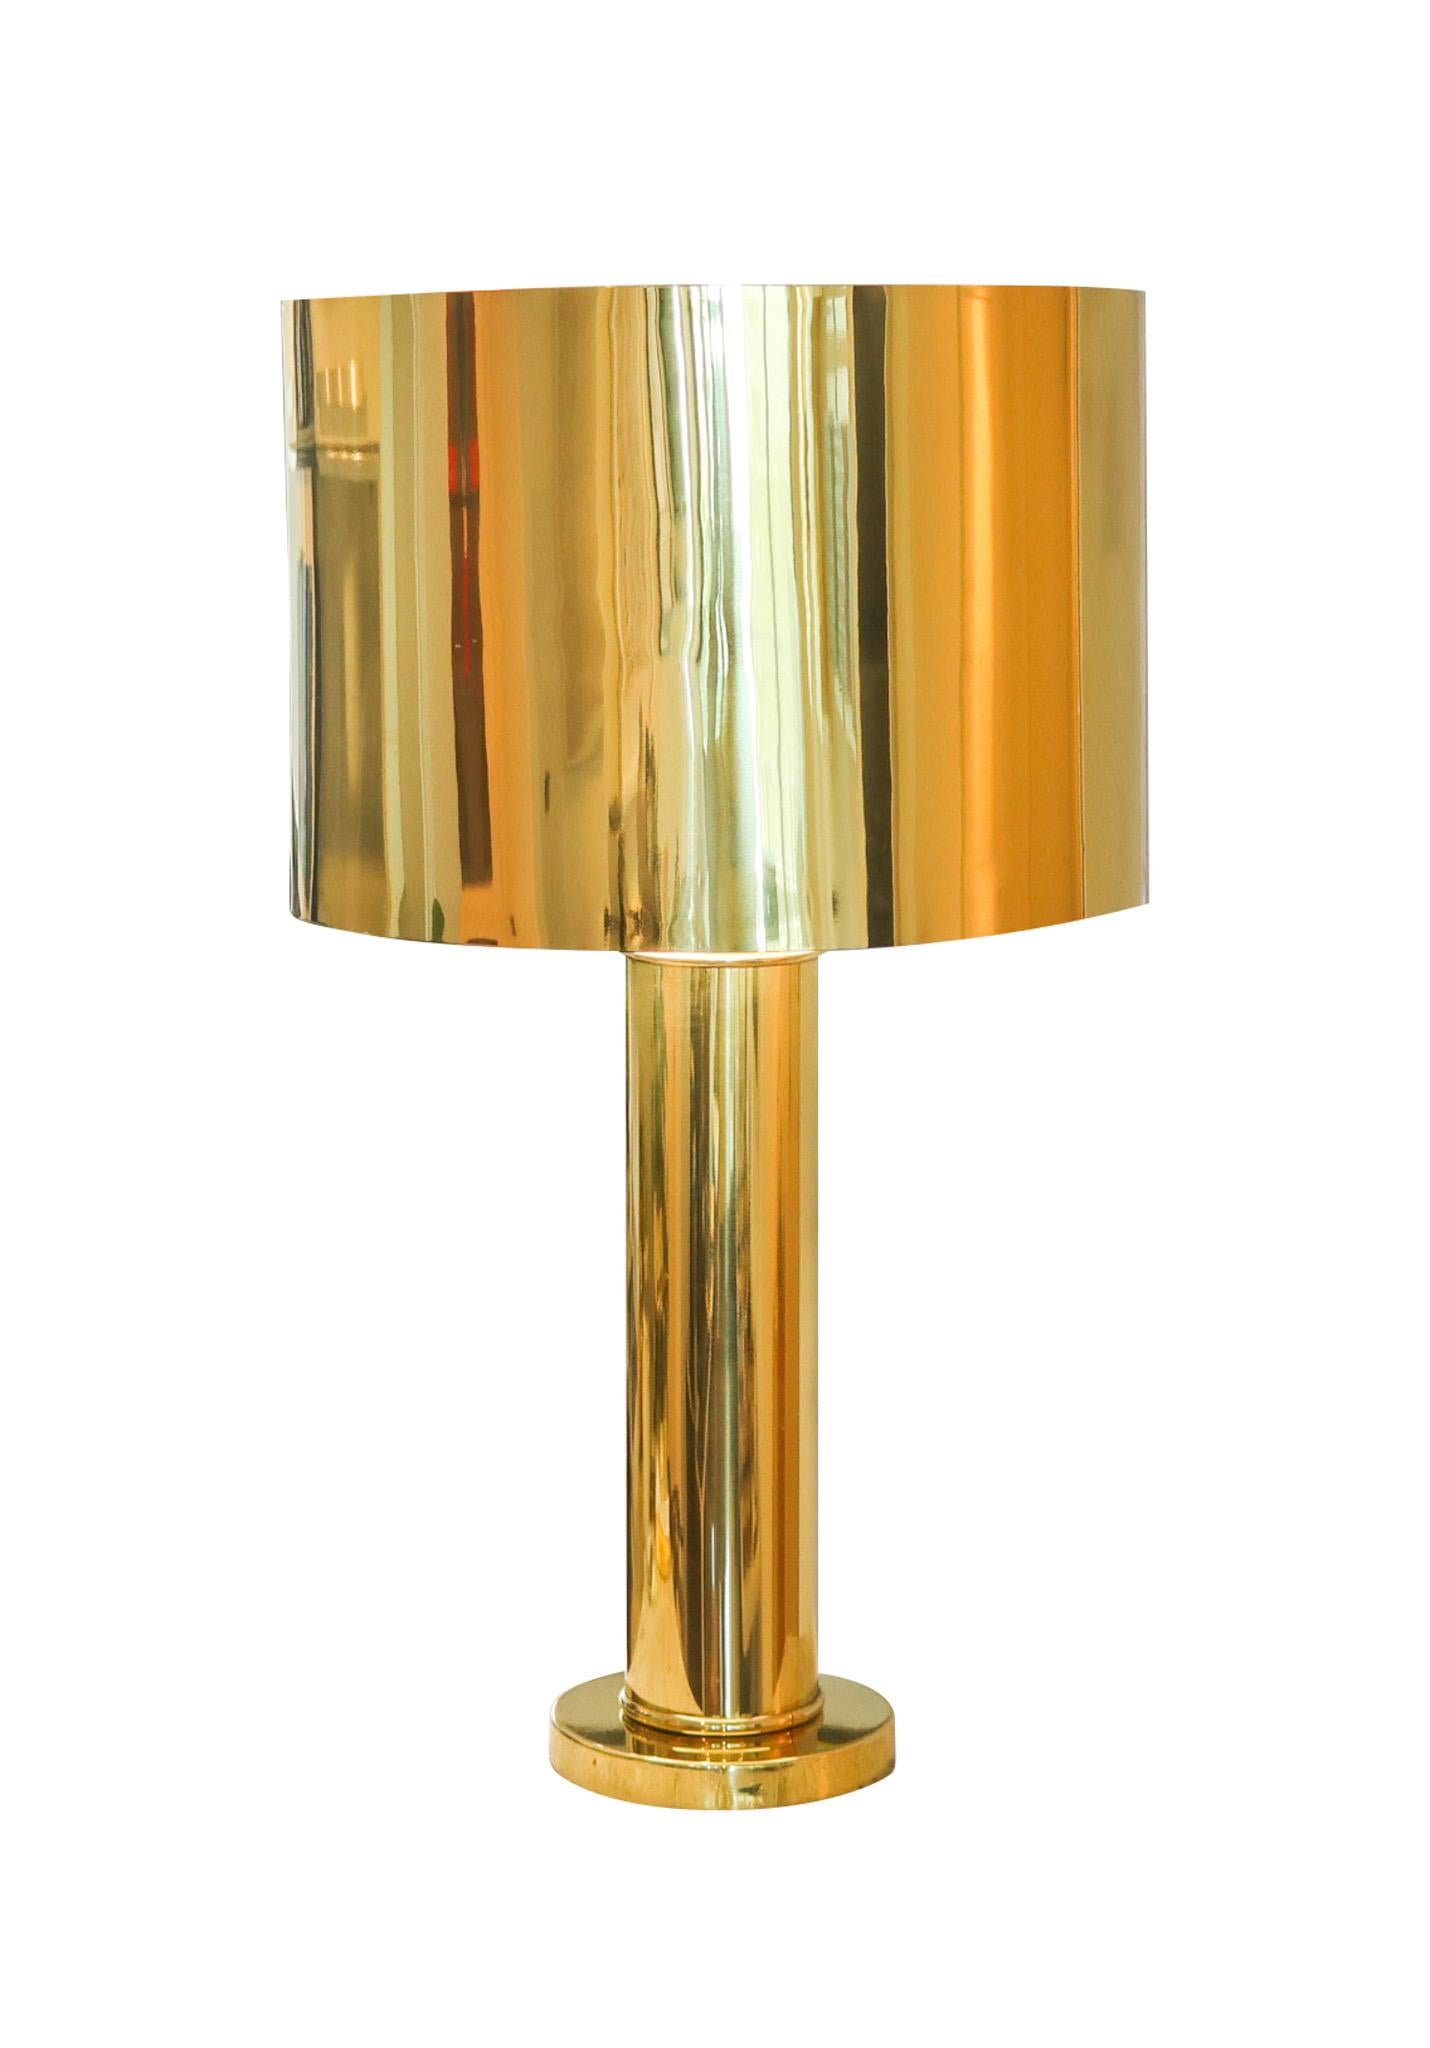 Table desk lamp designed by George Kovacs.

An exceptional, monumental and oversized desk-table lamp, created in America at the ateliers of George Kovacs, back in the 1960-1970. This large lamp is vintage and has been designed with modernist sleek